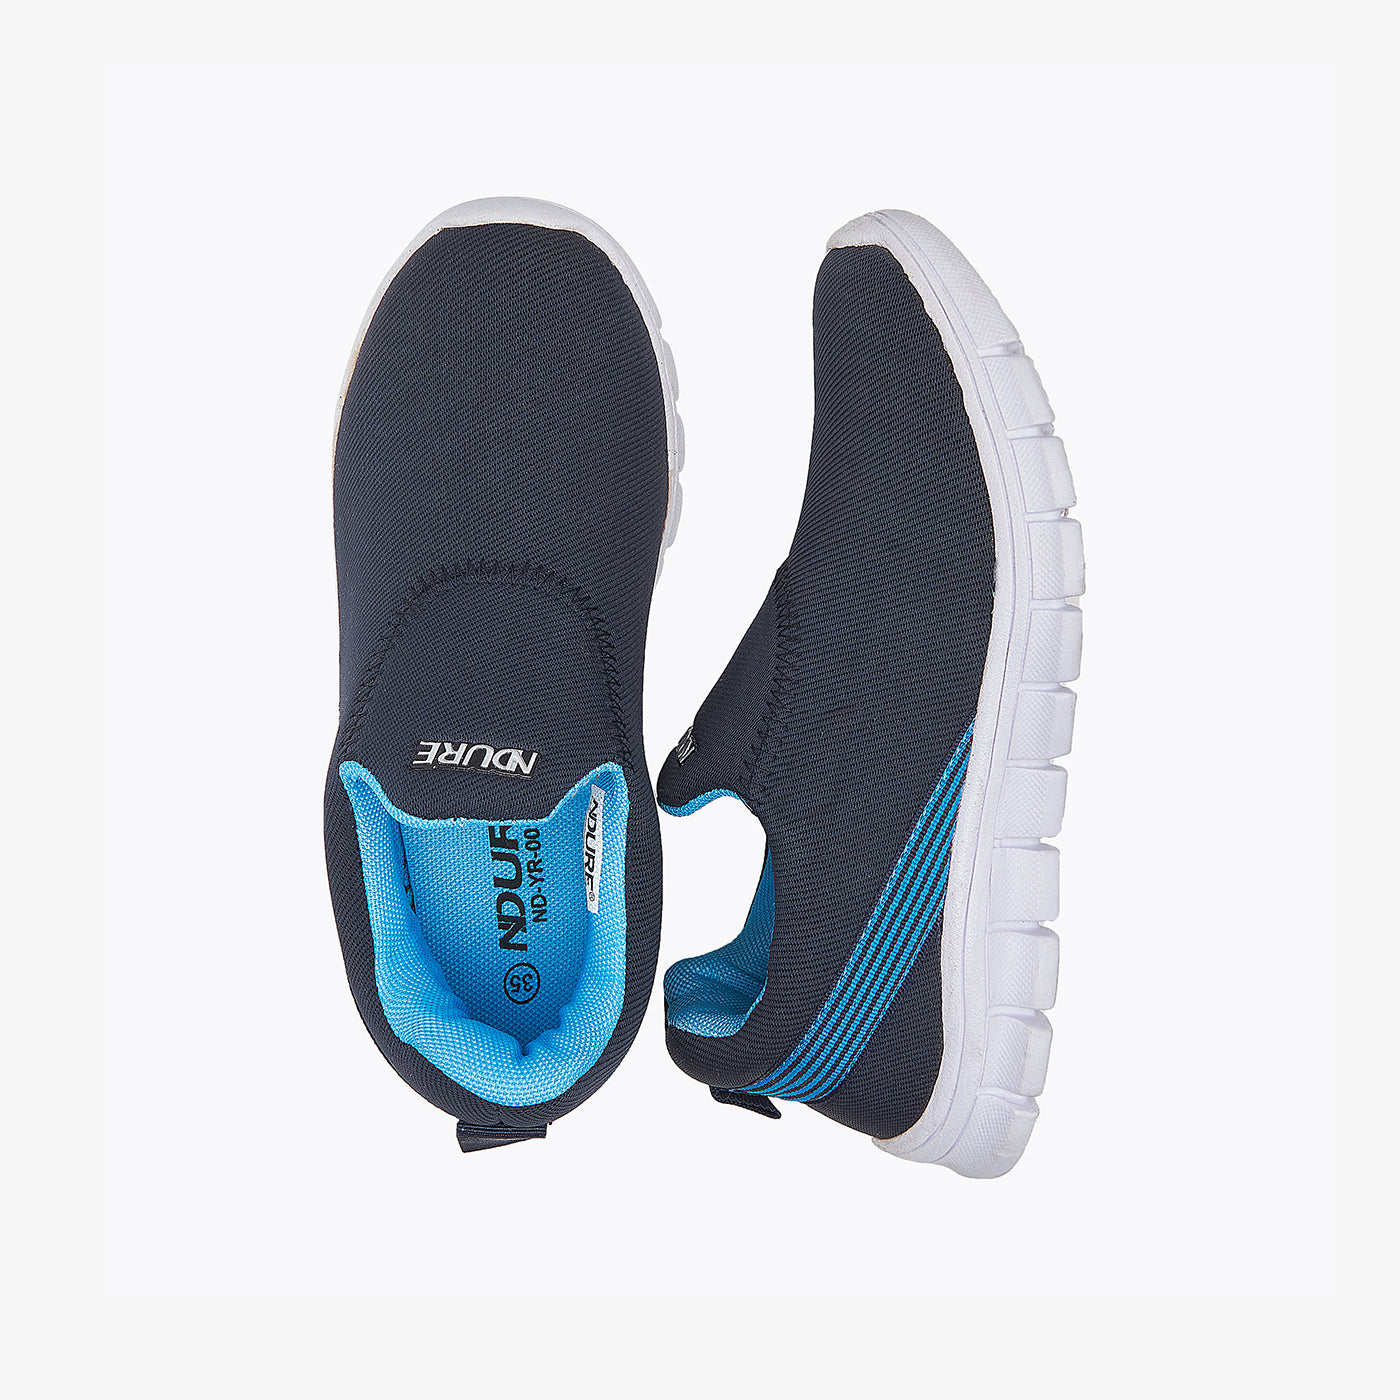 Best shoes price in Pakistan